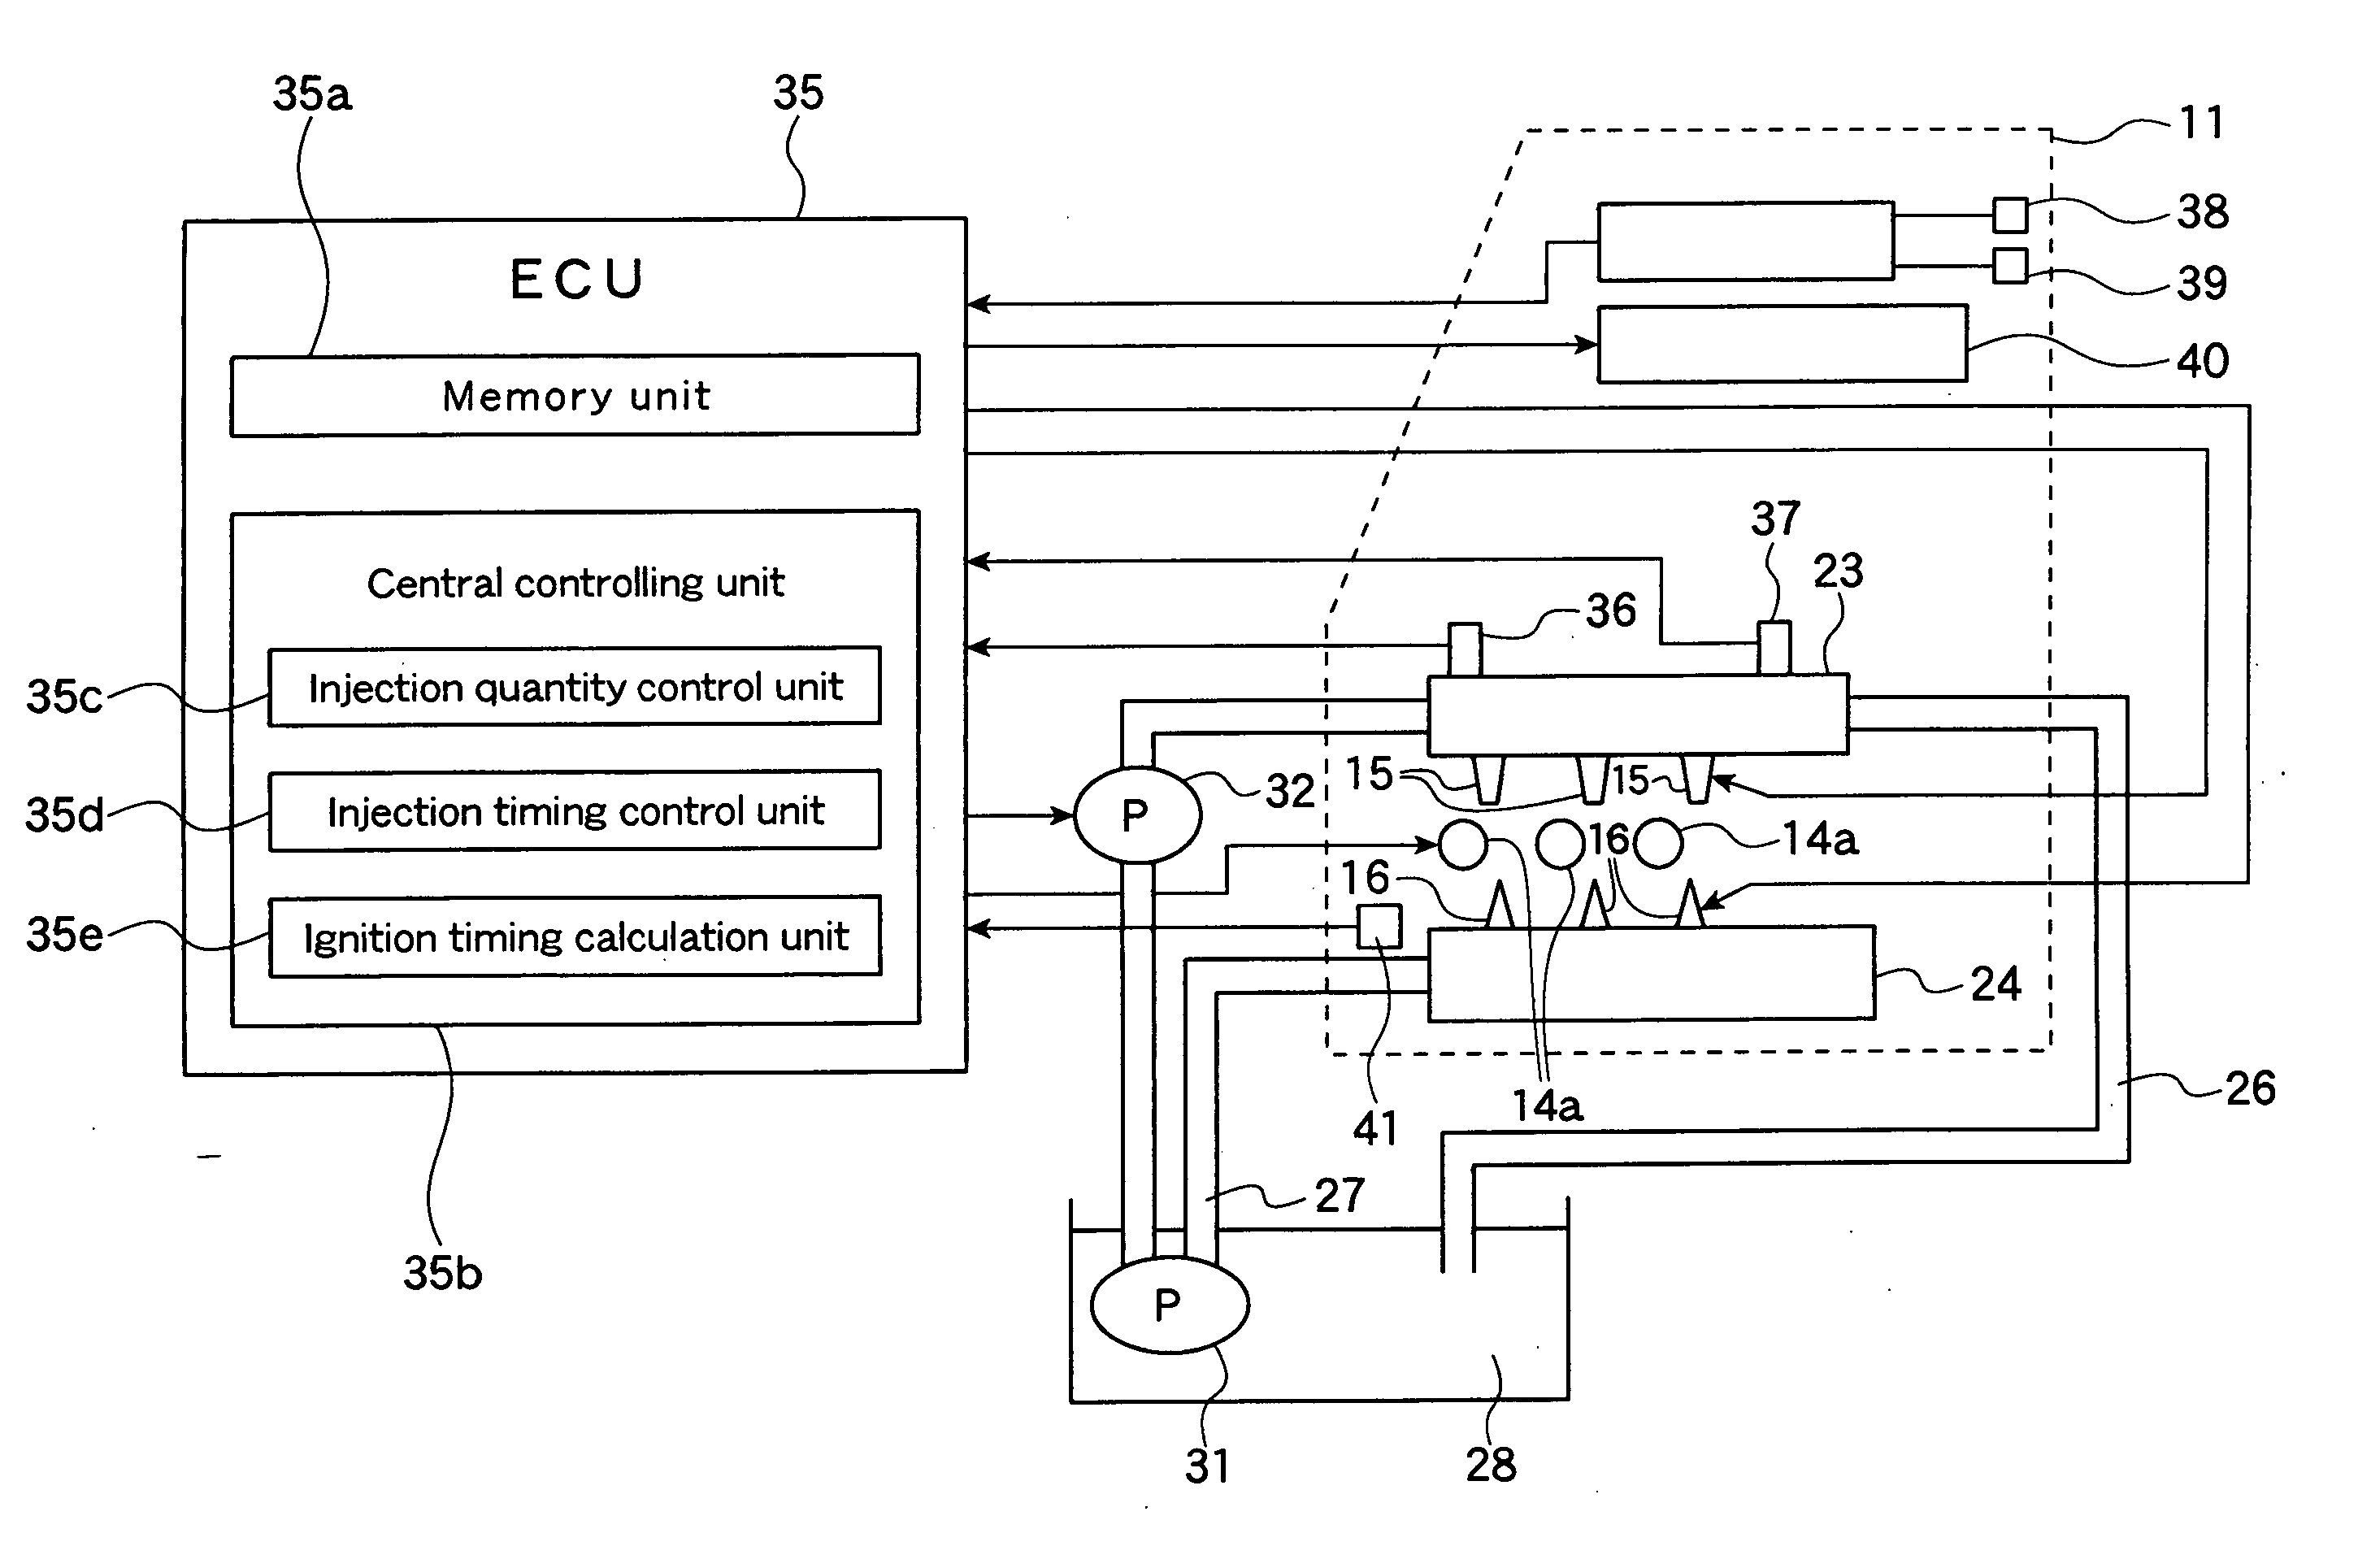 Internal combustion engine provided with double system of fuel injection